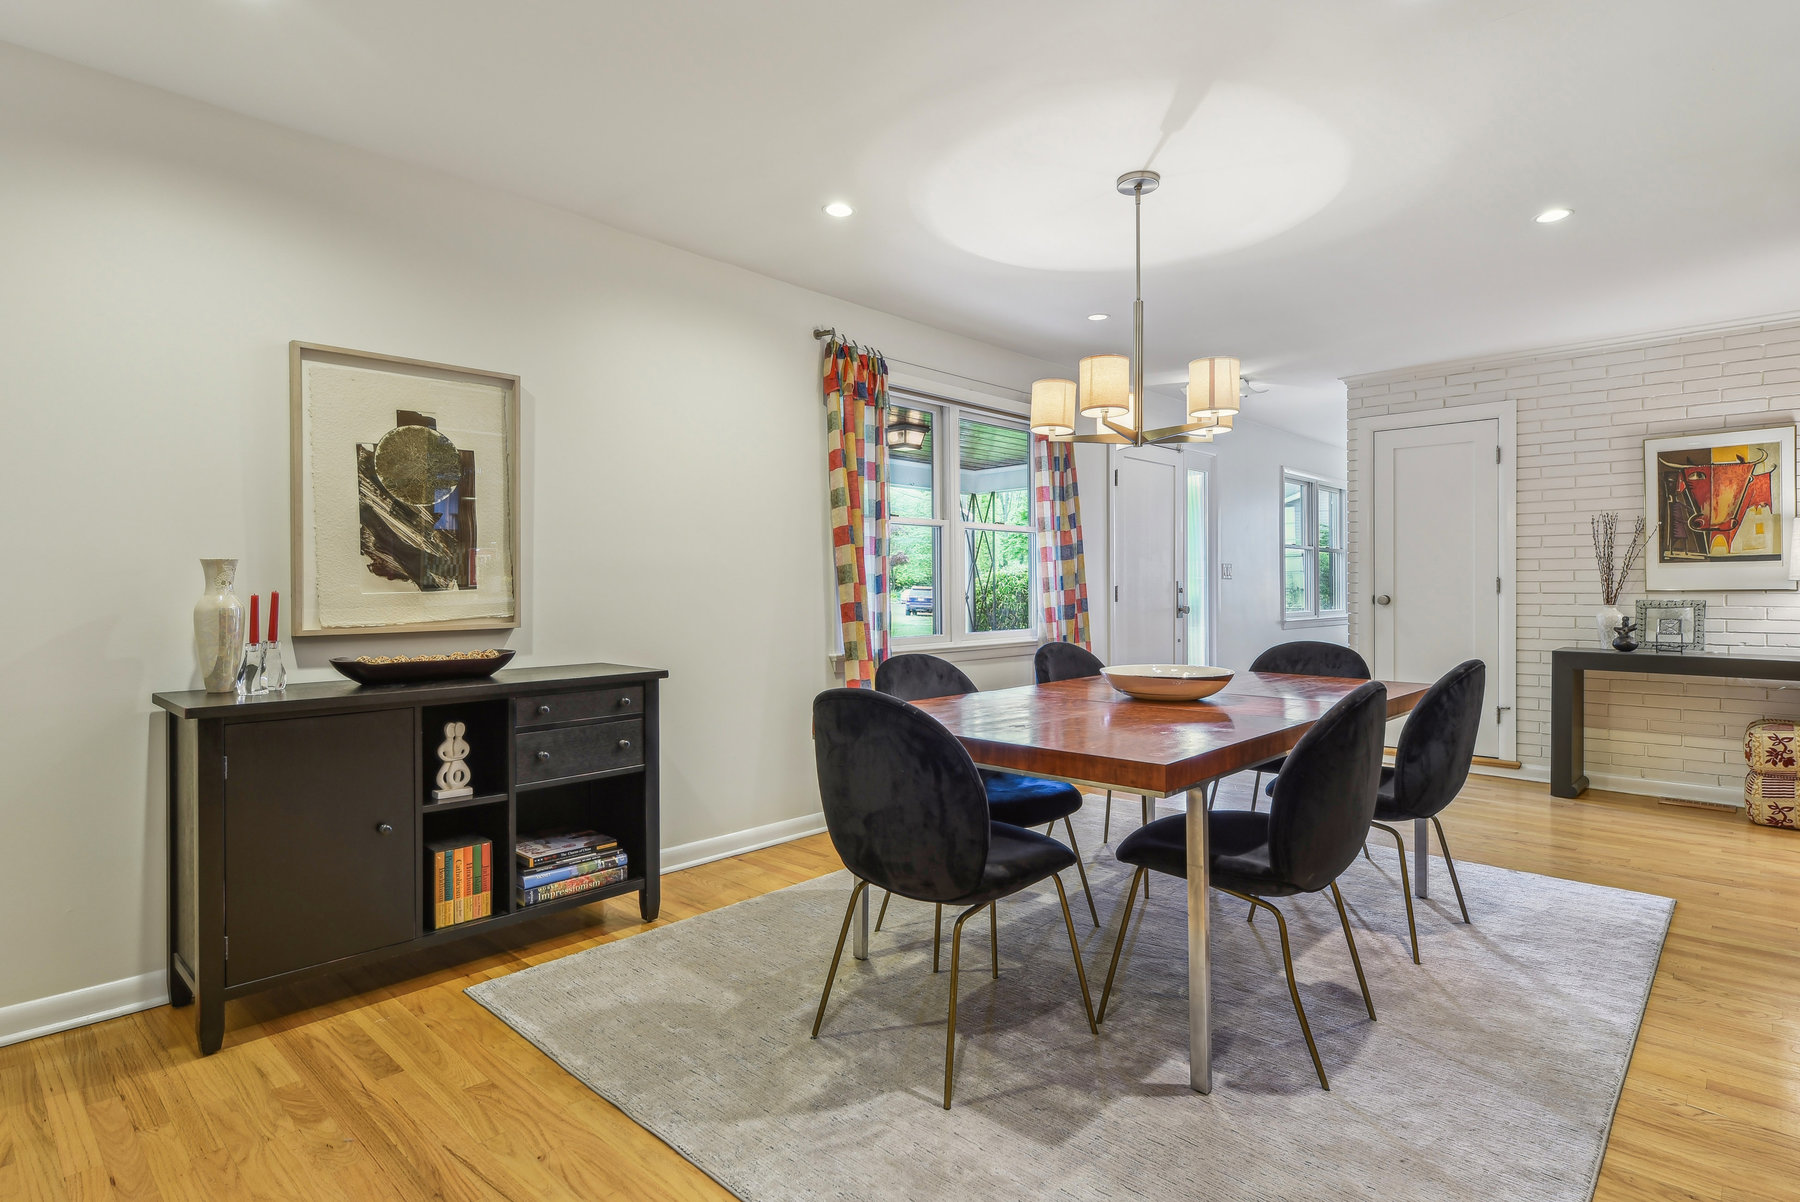 36 Winding Way, Short Hills - Dining Room to front of house